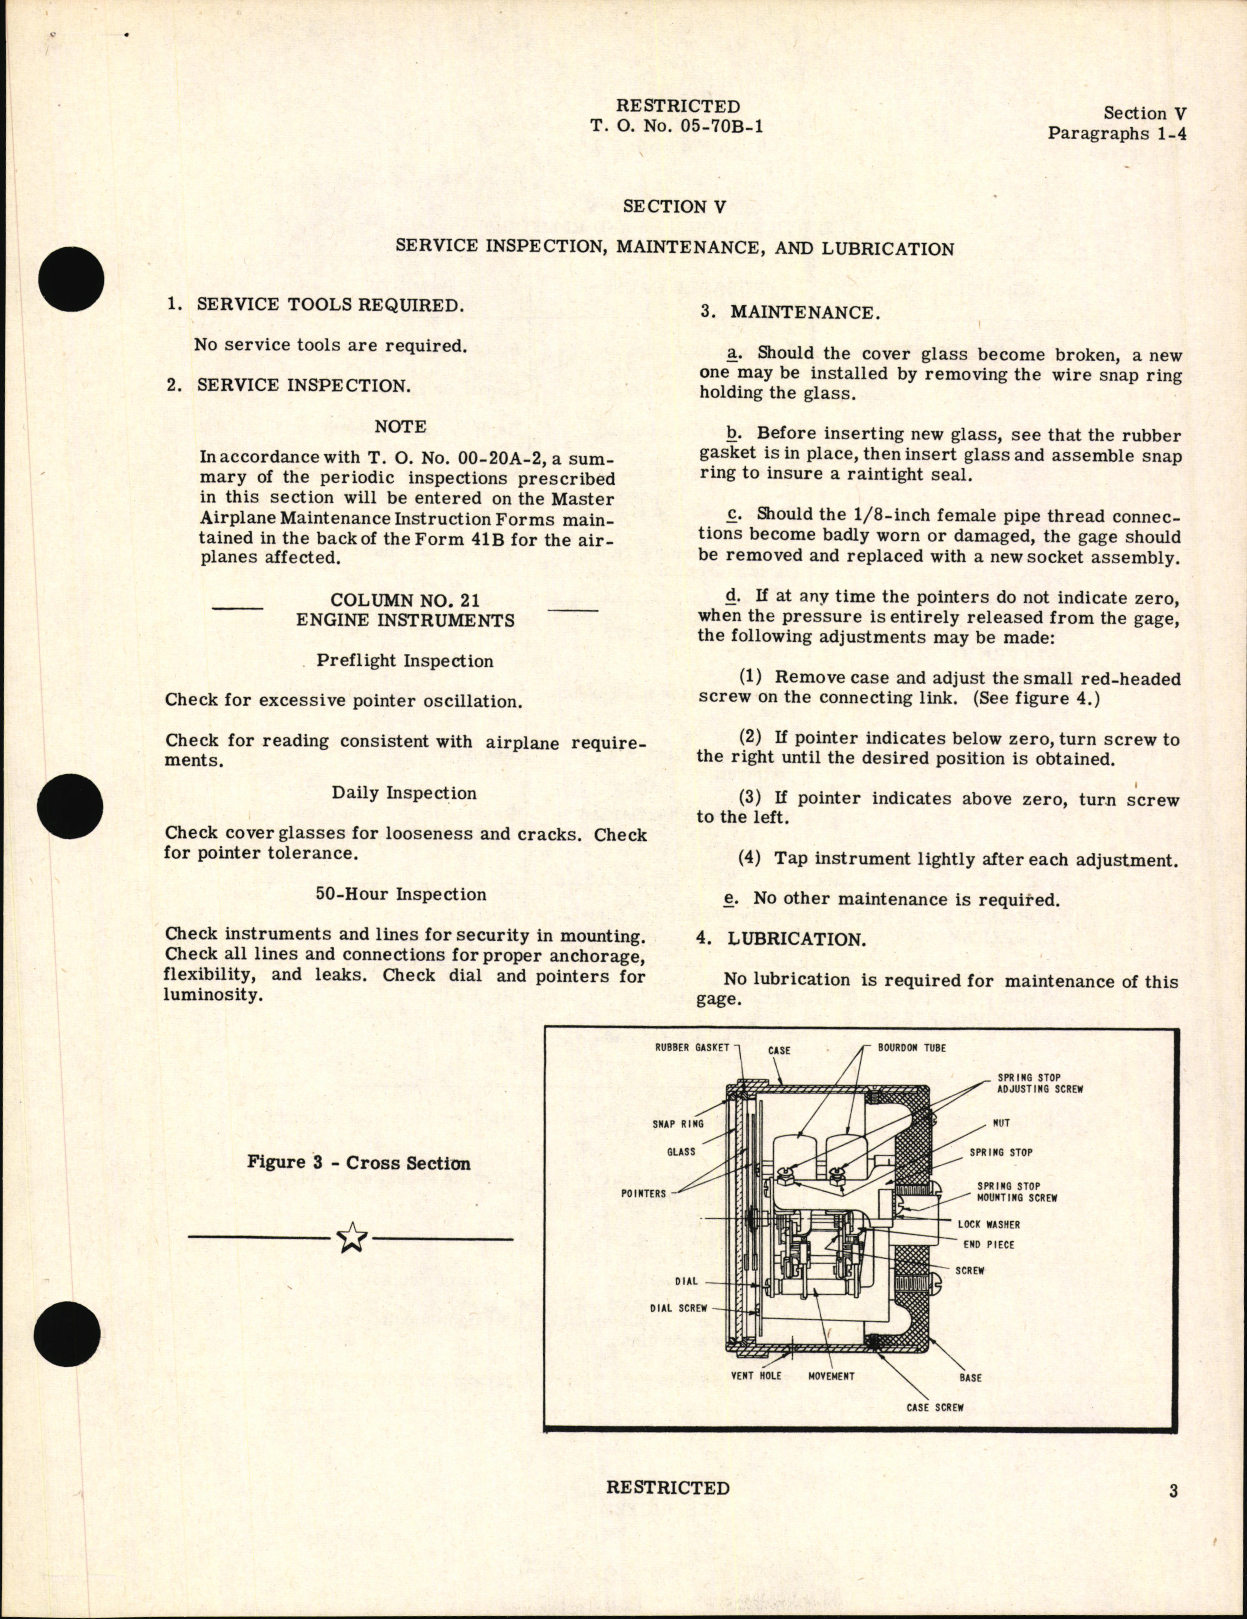 Sample page 7 from AirCorps Library document: Handbook of Instructions with Parts Catalog for Type AN 5772-2 Dual Oil Pressure Gage